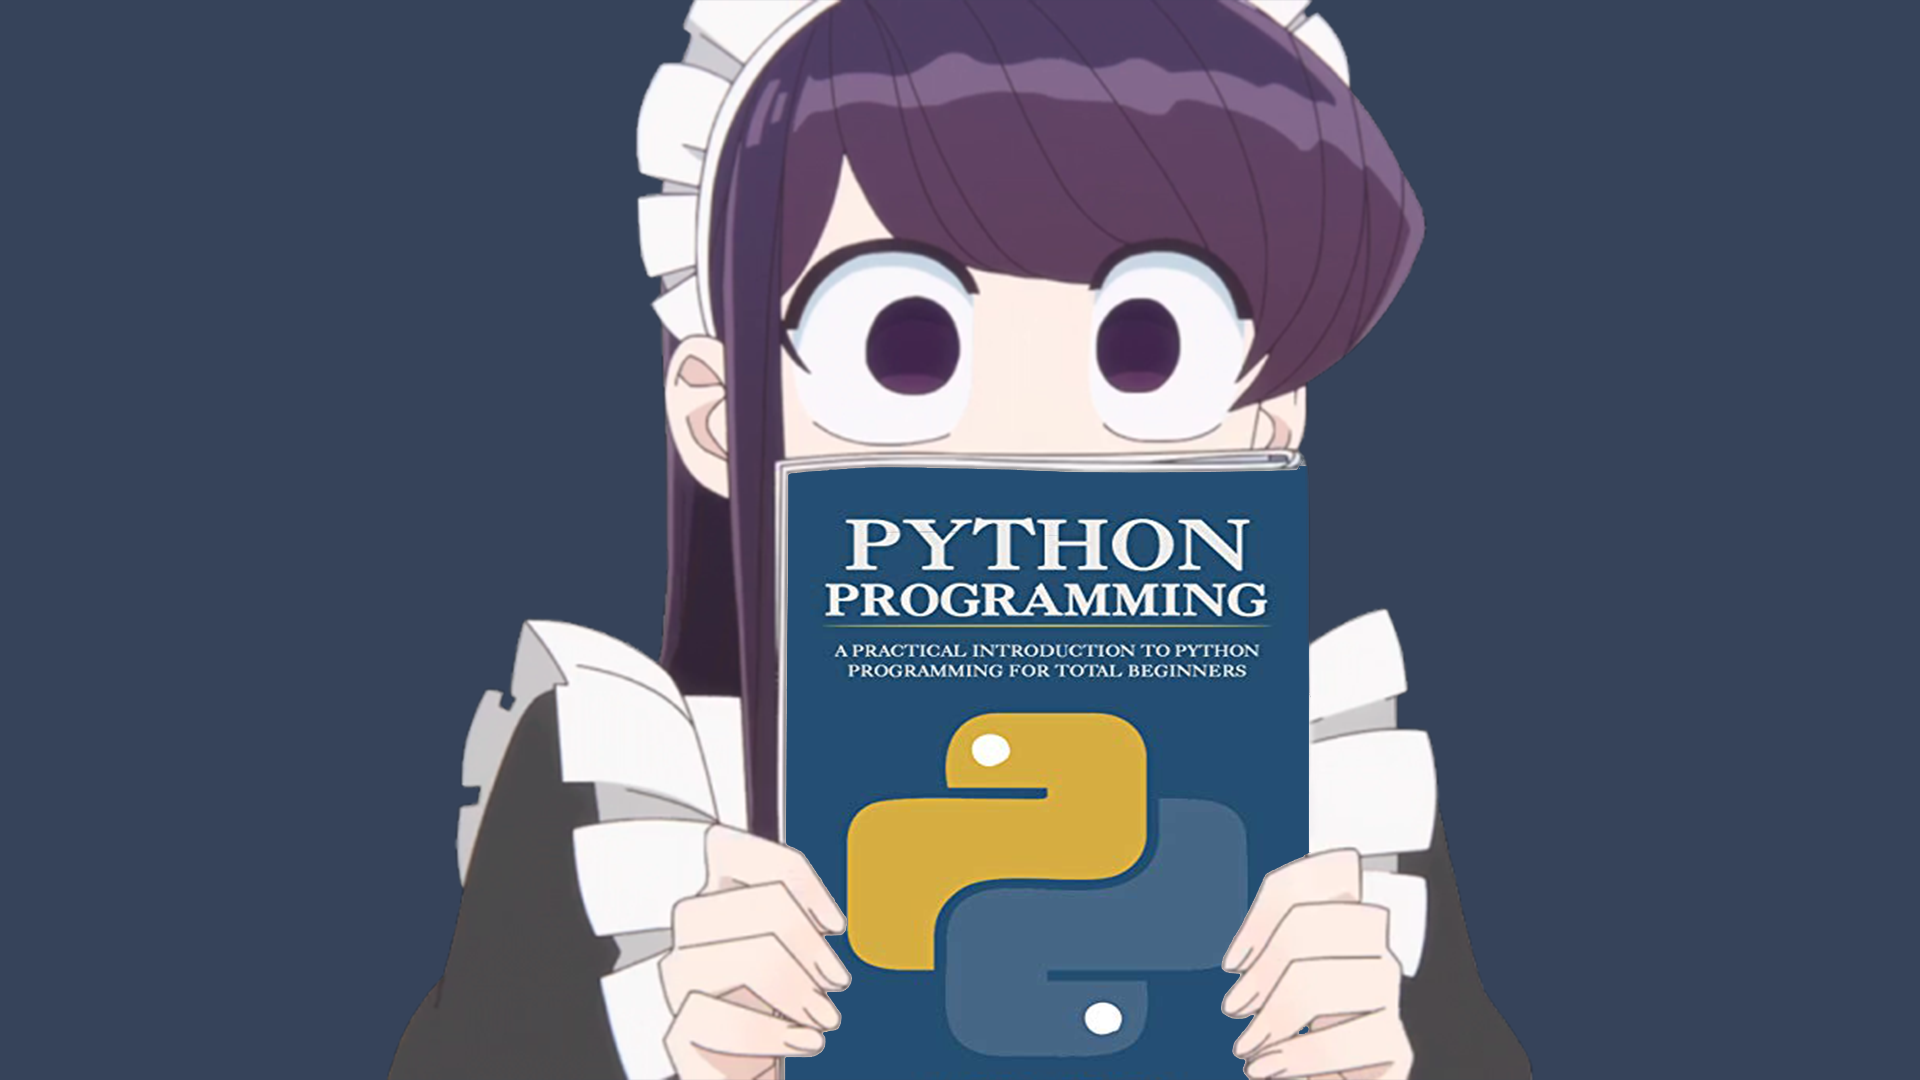 Komi-san in a maid outfit holding a Python programming book